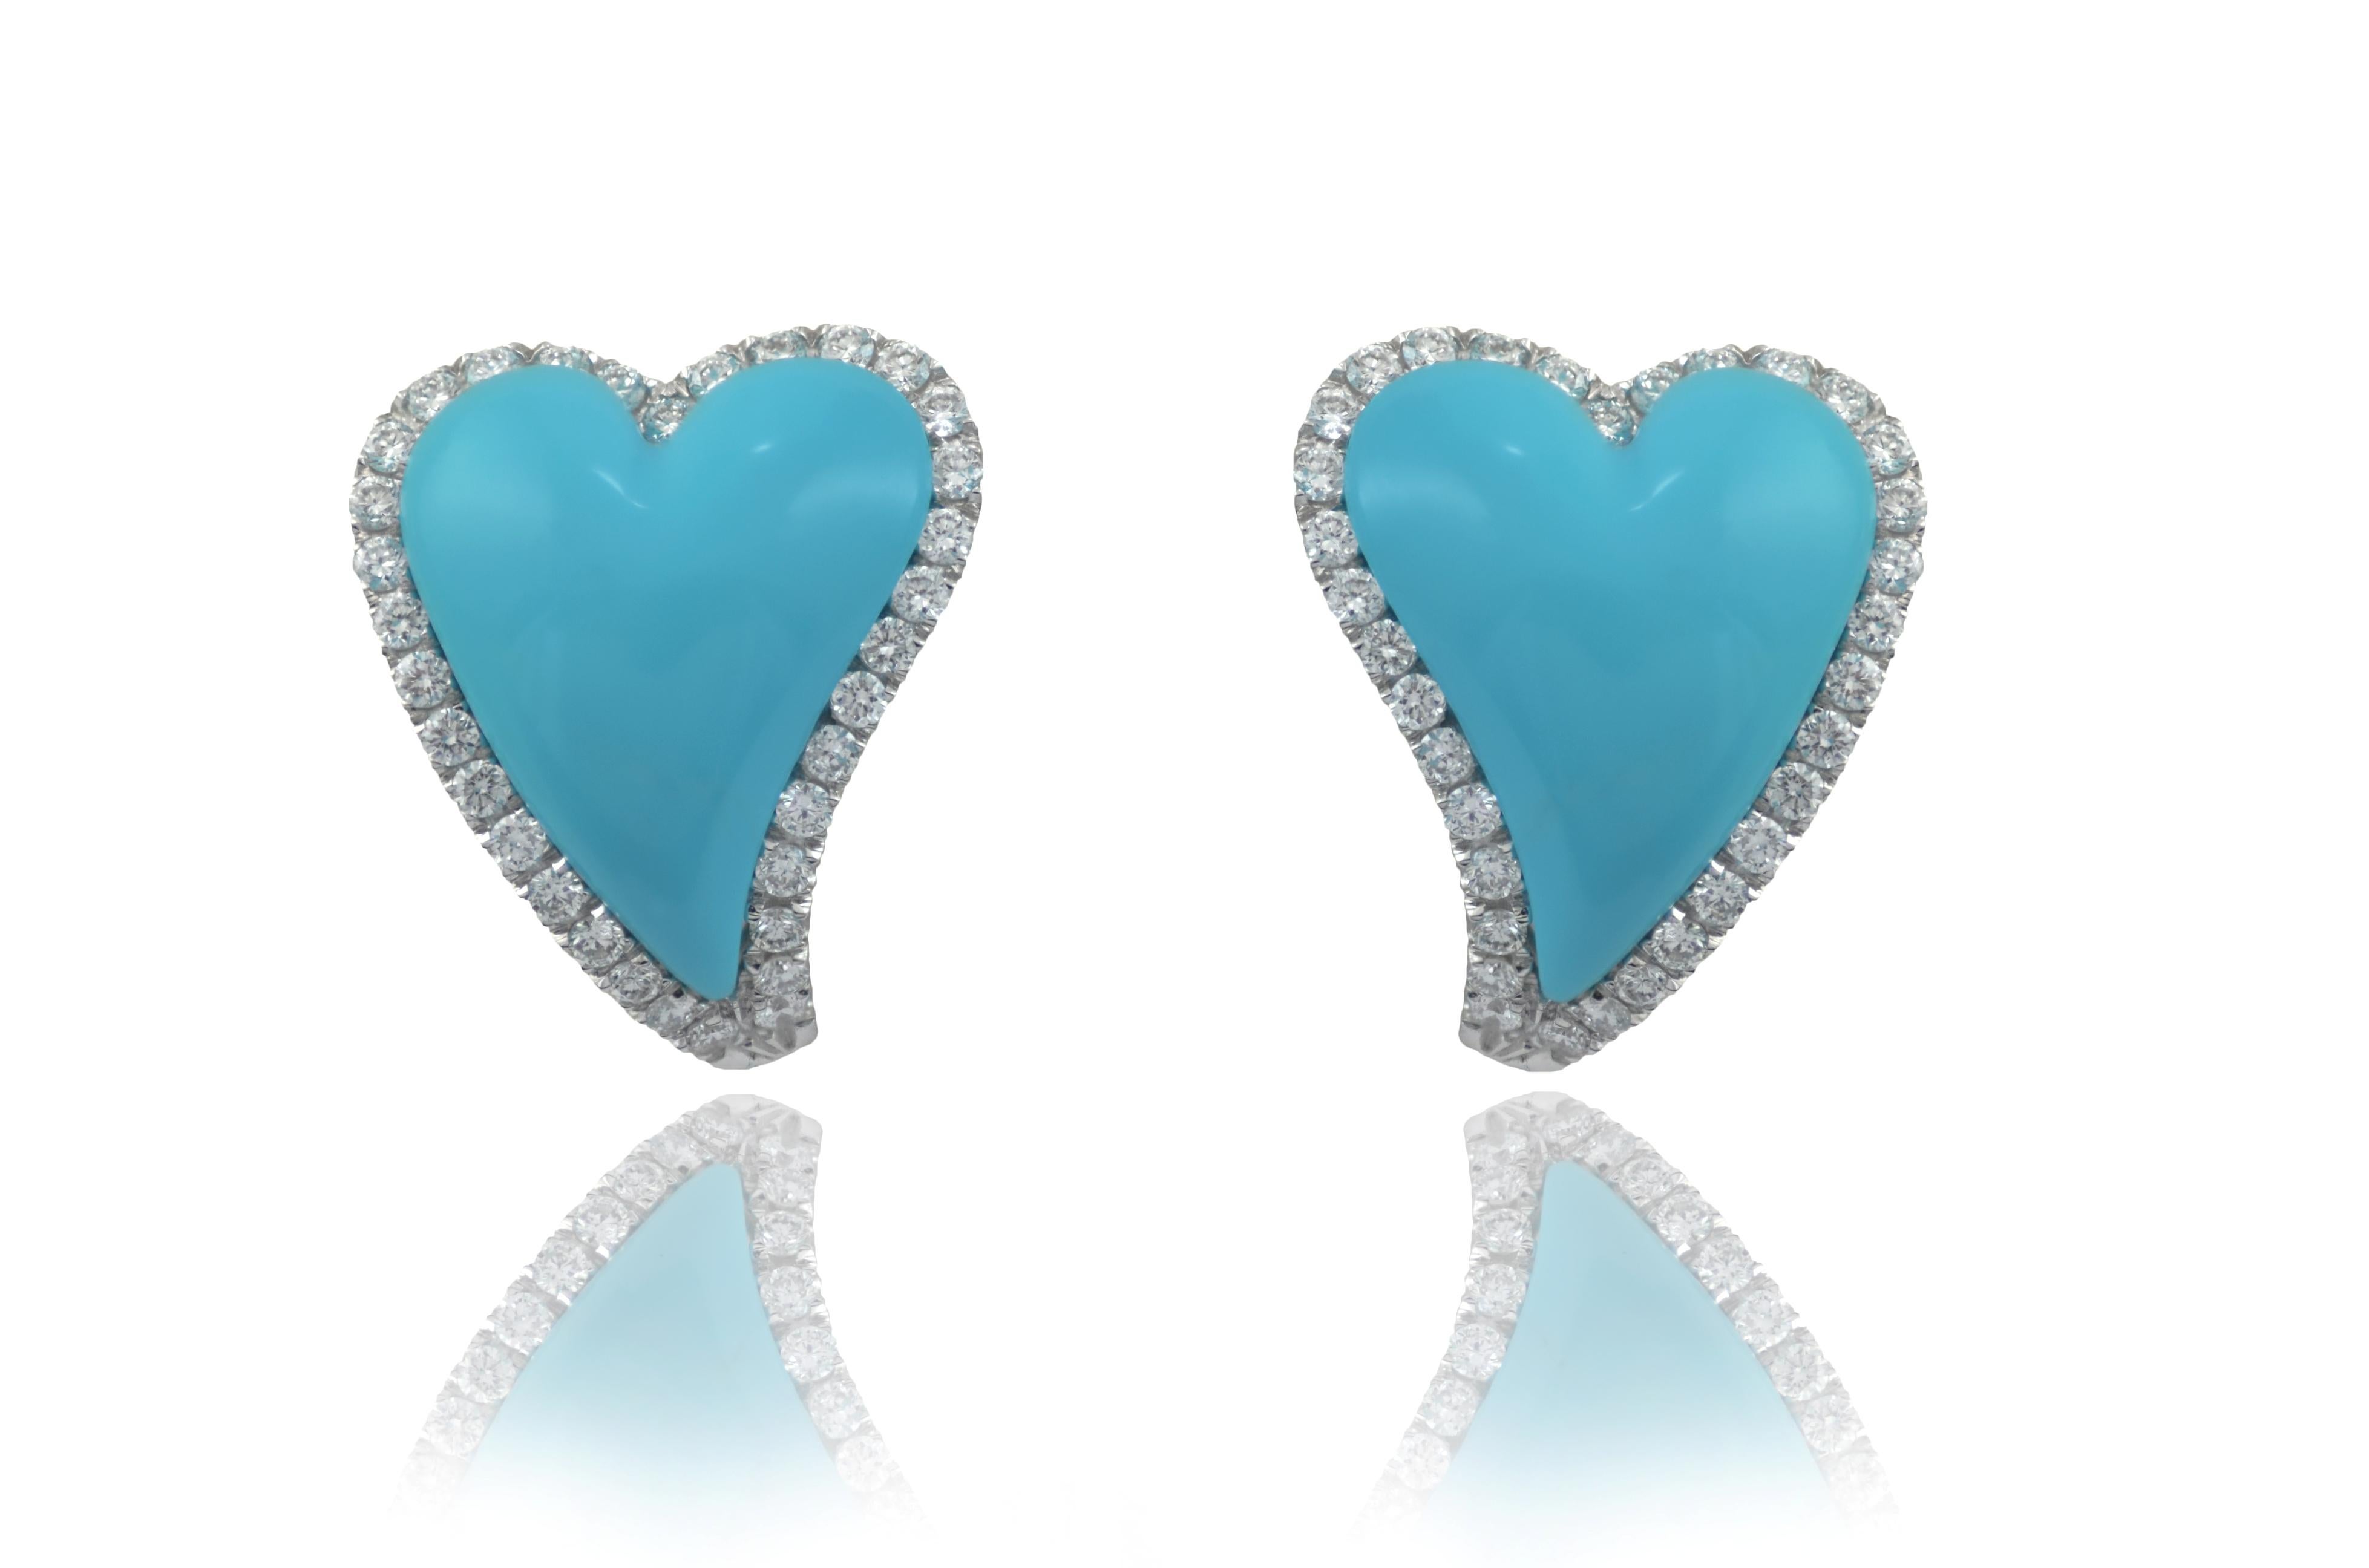 Handcrafted in Italy, in Margherita Burgener workshop, the Two Hearts earrings are elegant and special. Realized in 18Kt white gold, set with diamonds to highlight the bombé natural turquoise hearts.
Eye-catching earrings yet very